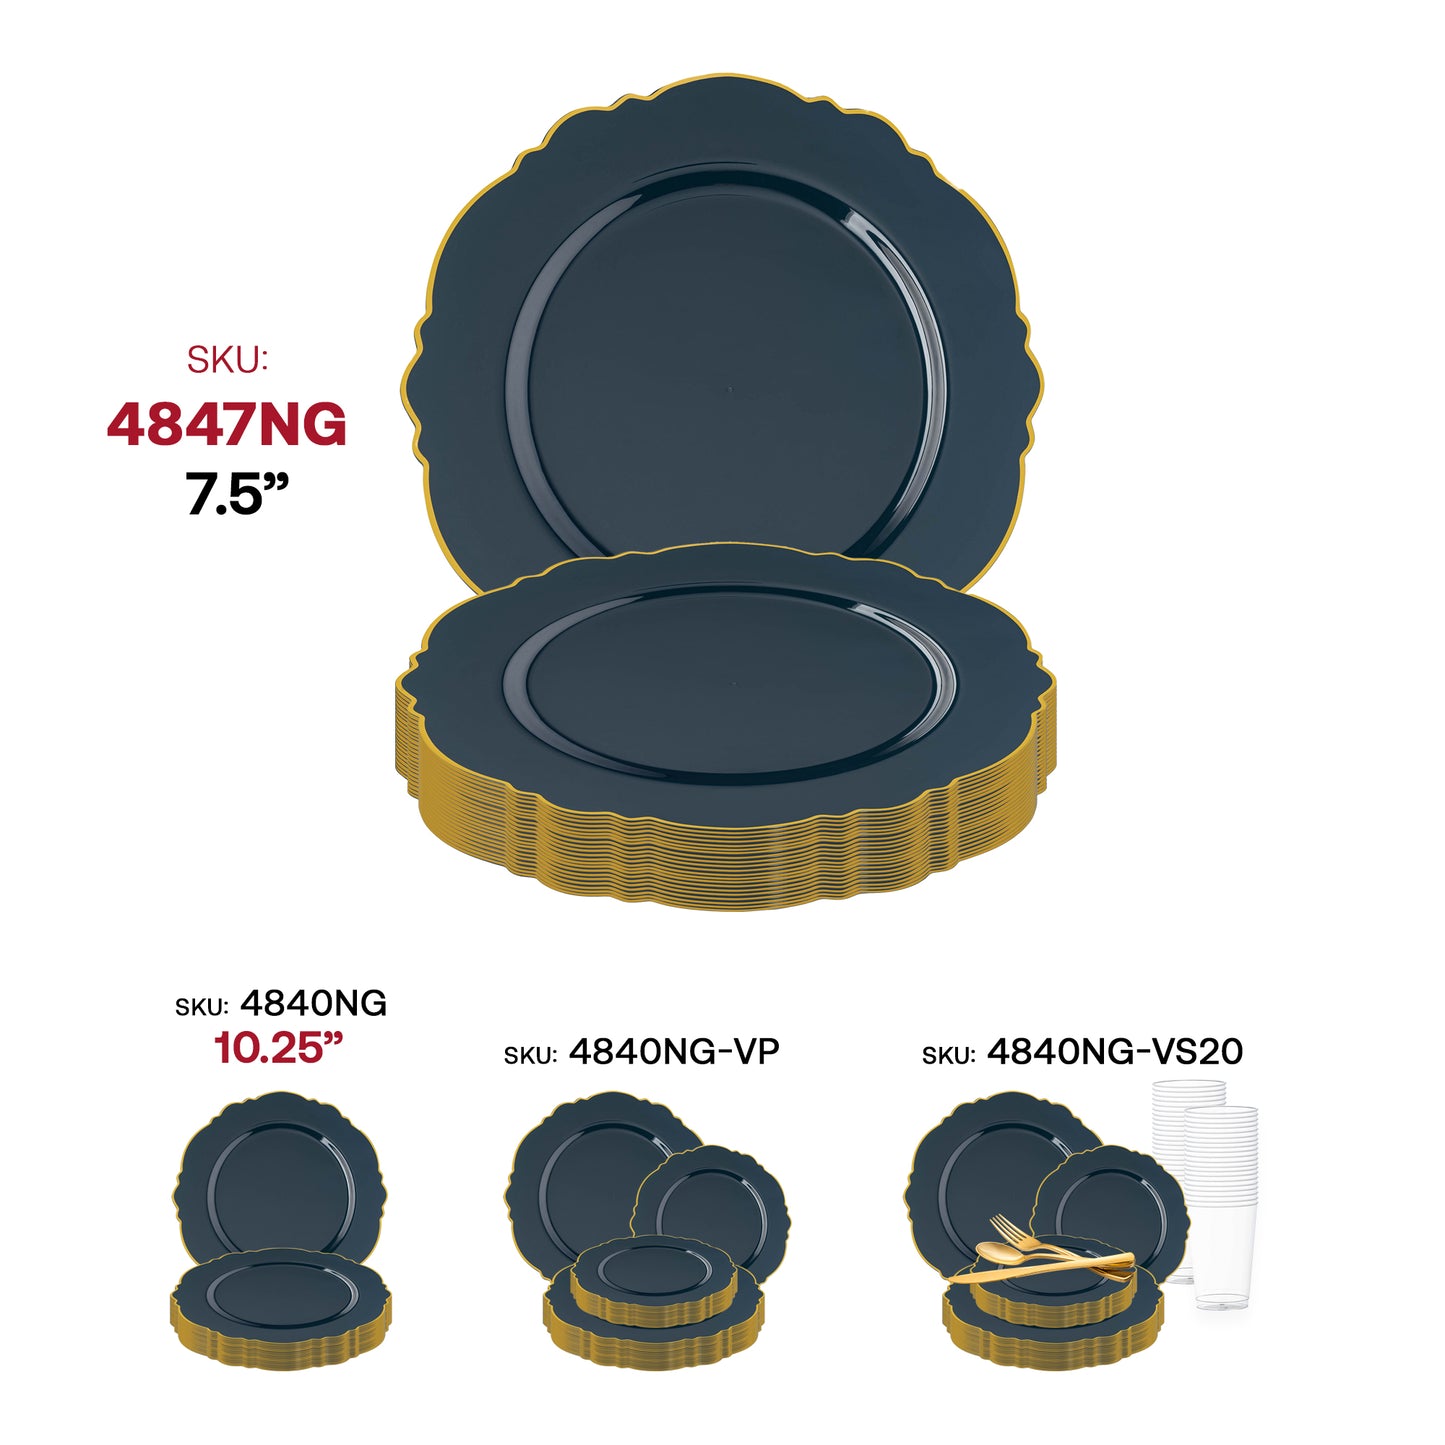 Navy with Gold Rim Round Blossom Disposable Plastic Appetizer/Salad Plates (7.5") SKU | The Kaya Collection